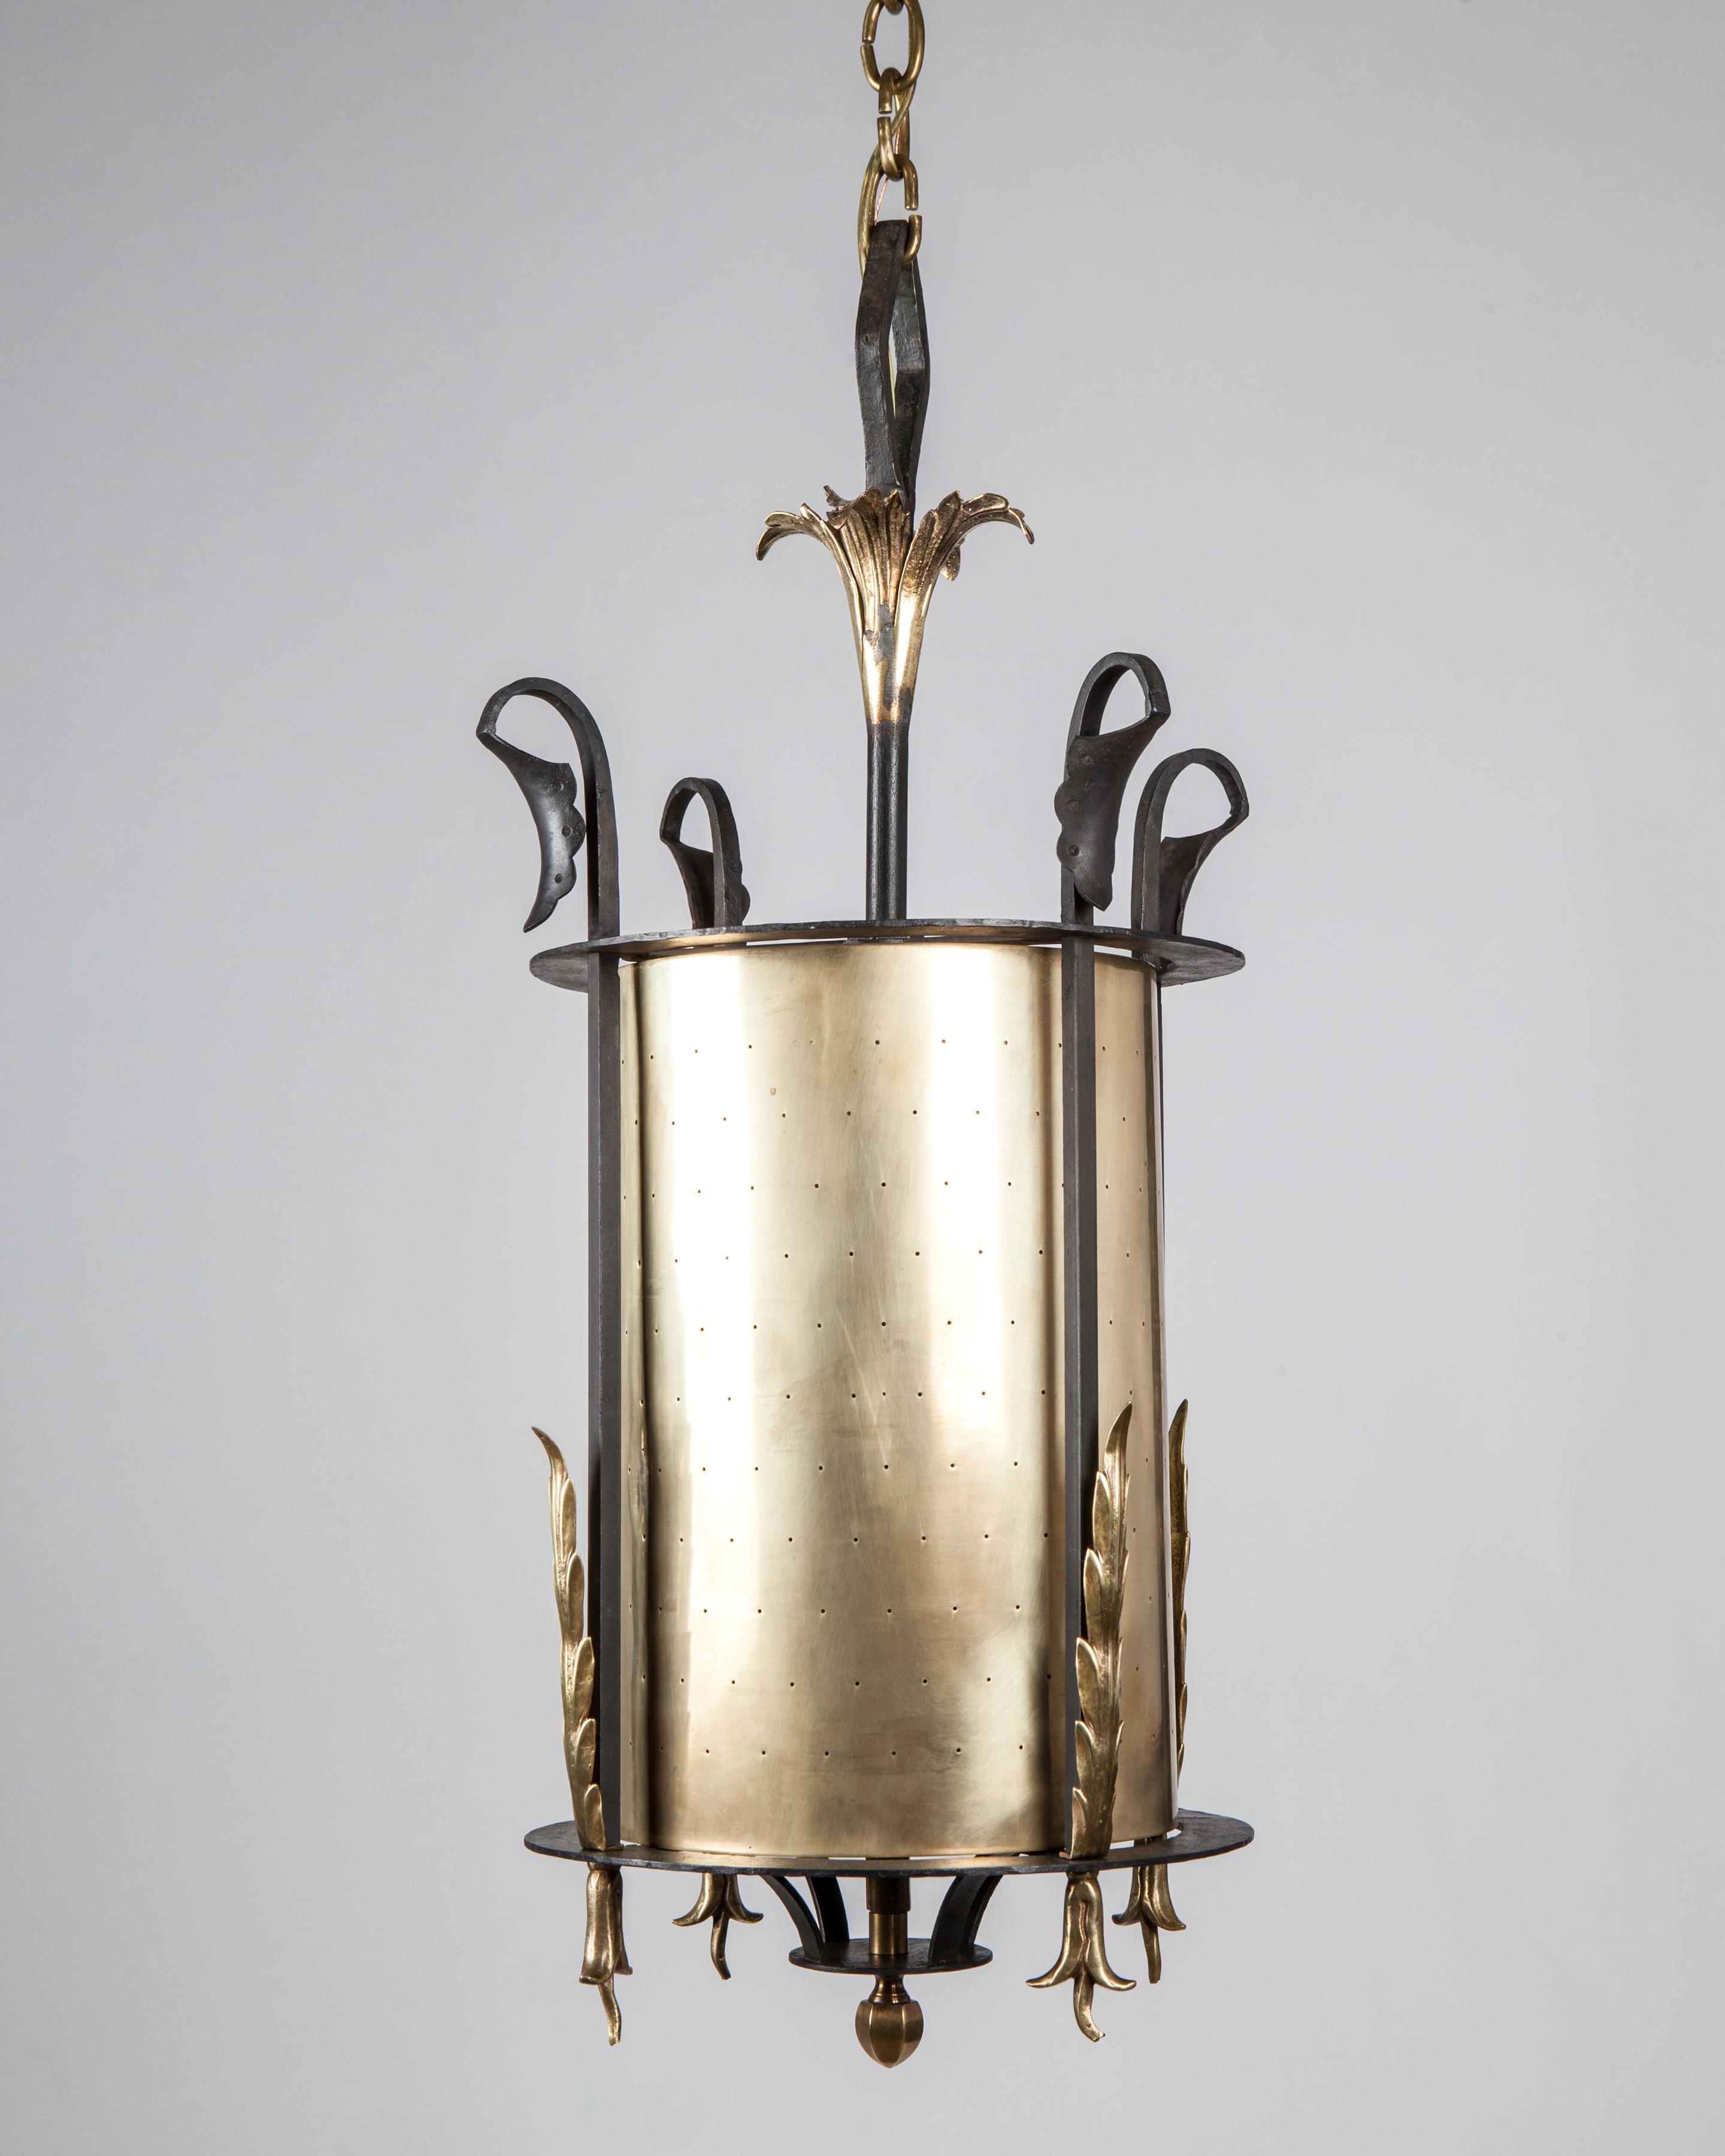 AHL4163
A round vintage pendant lantern with a blackened wrought iron frame holding a brass cylinder pierced overall with small pinpoint holes. The shade and foliate details all in a mellowed brass finish. Circa 1950s.

Dimensions:
Current